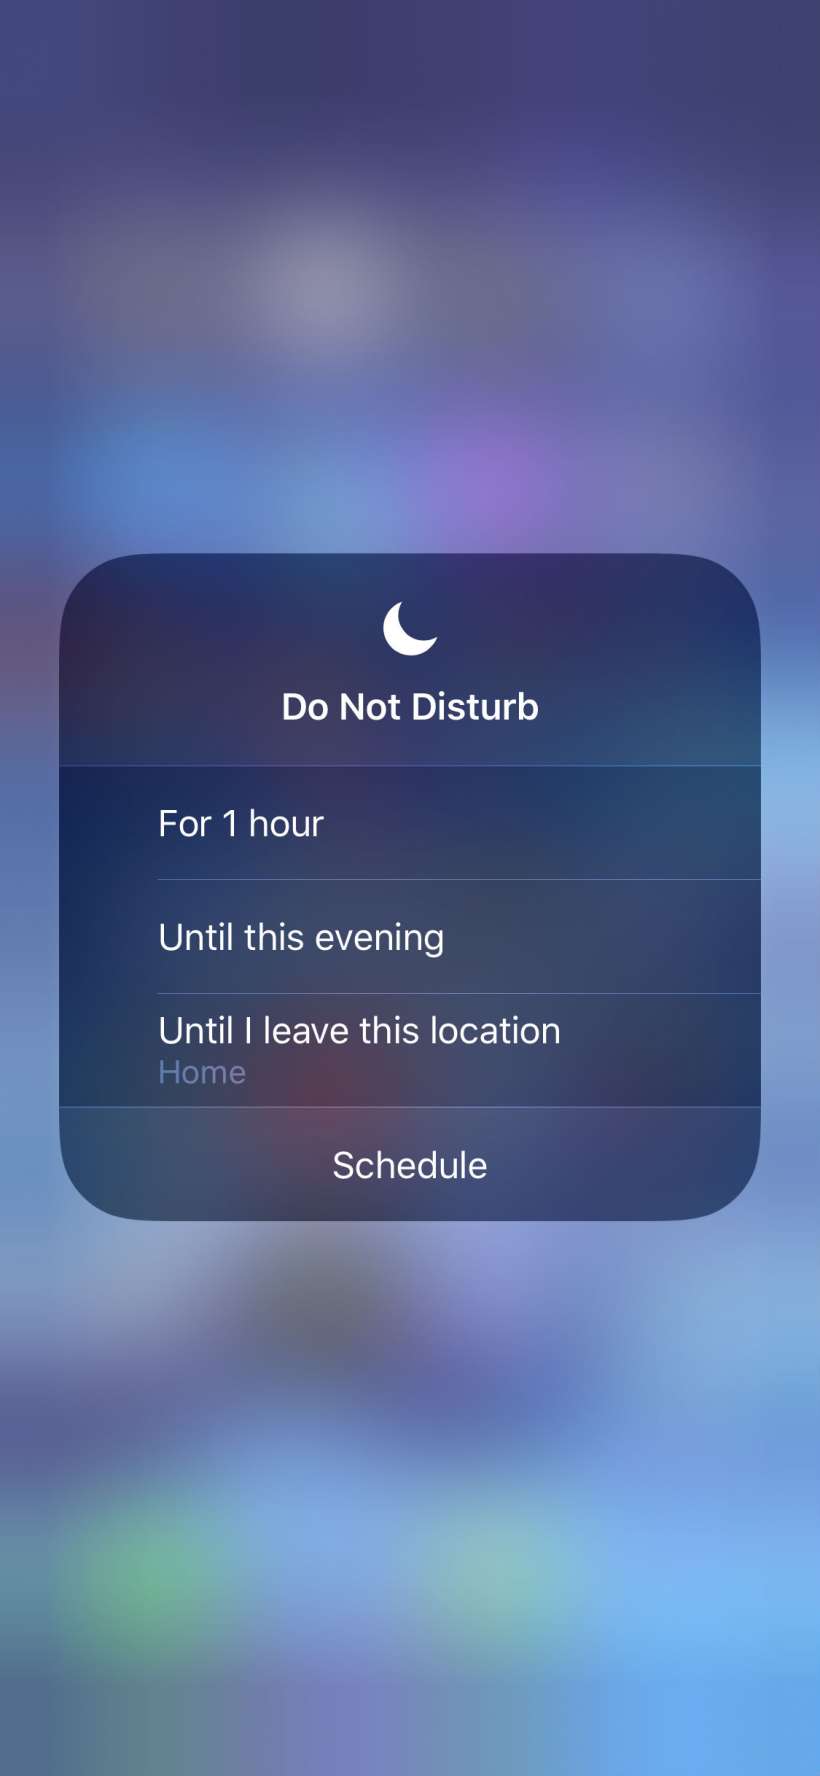 How to use iOS 12 Do Not Disturb new shortcuts on iPhone and iPad.